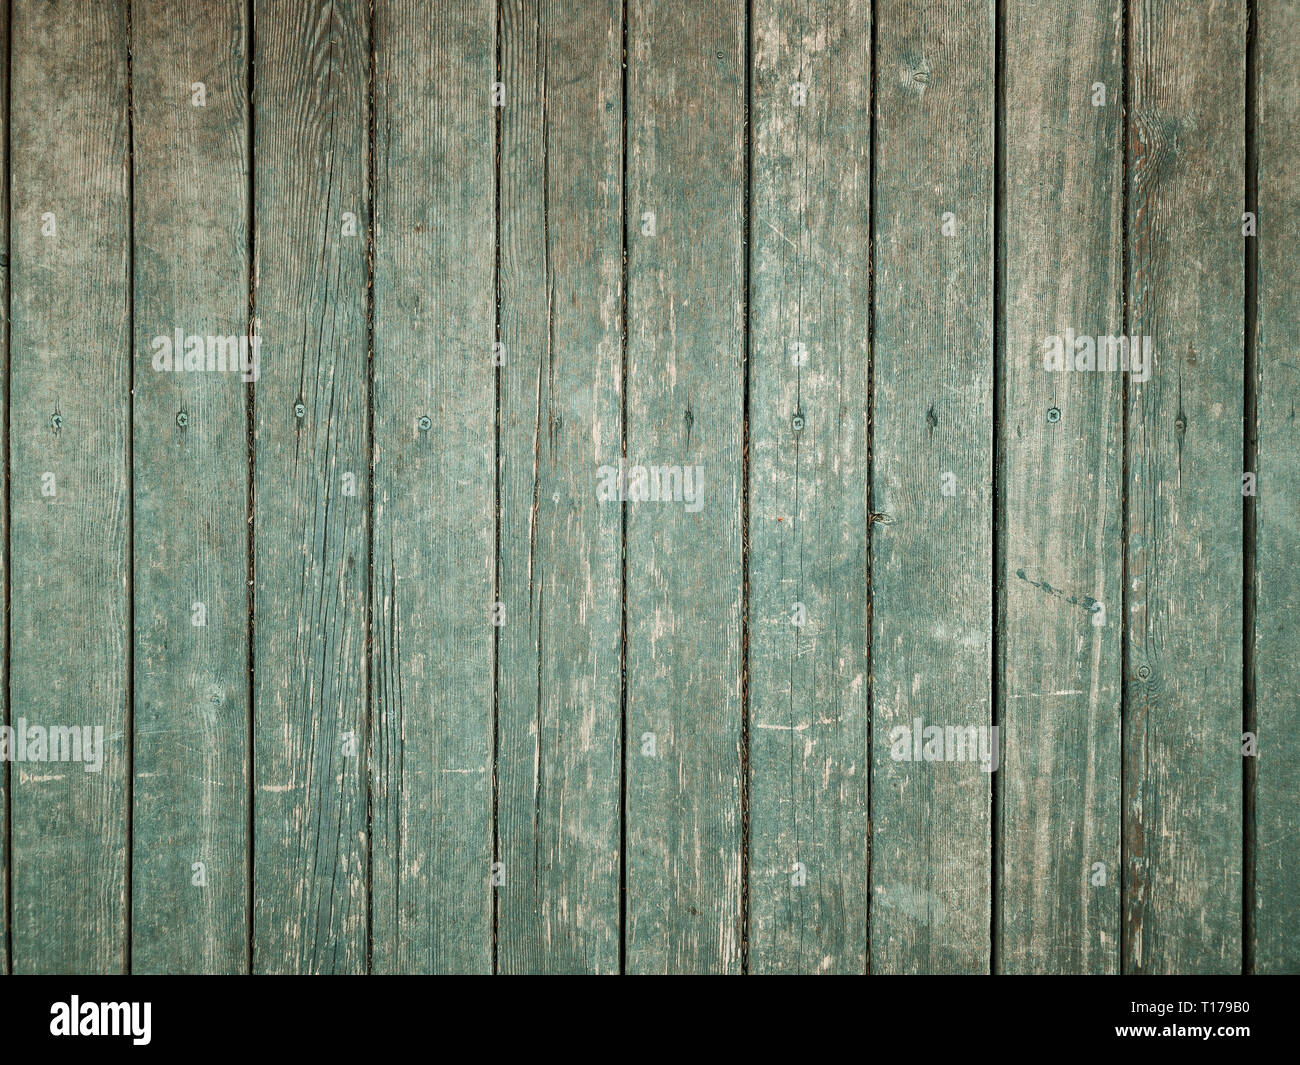 Background of old wooden vintage texture boards painted with green paint Stock Photo